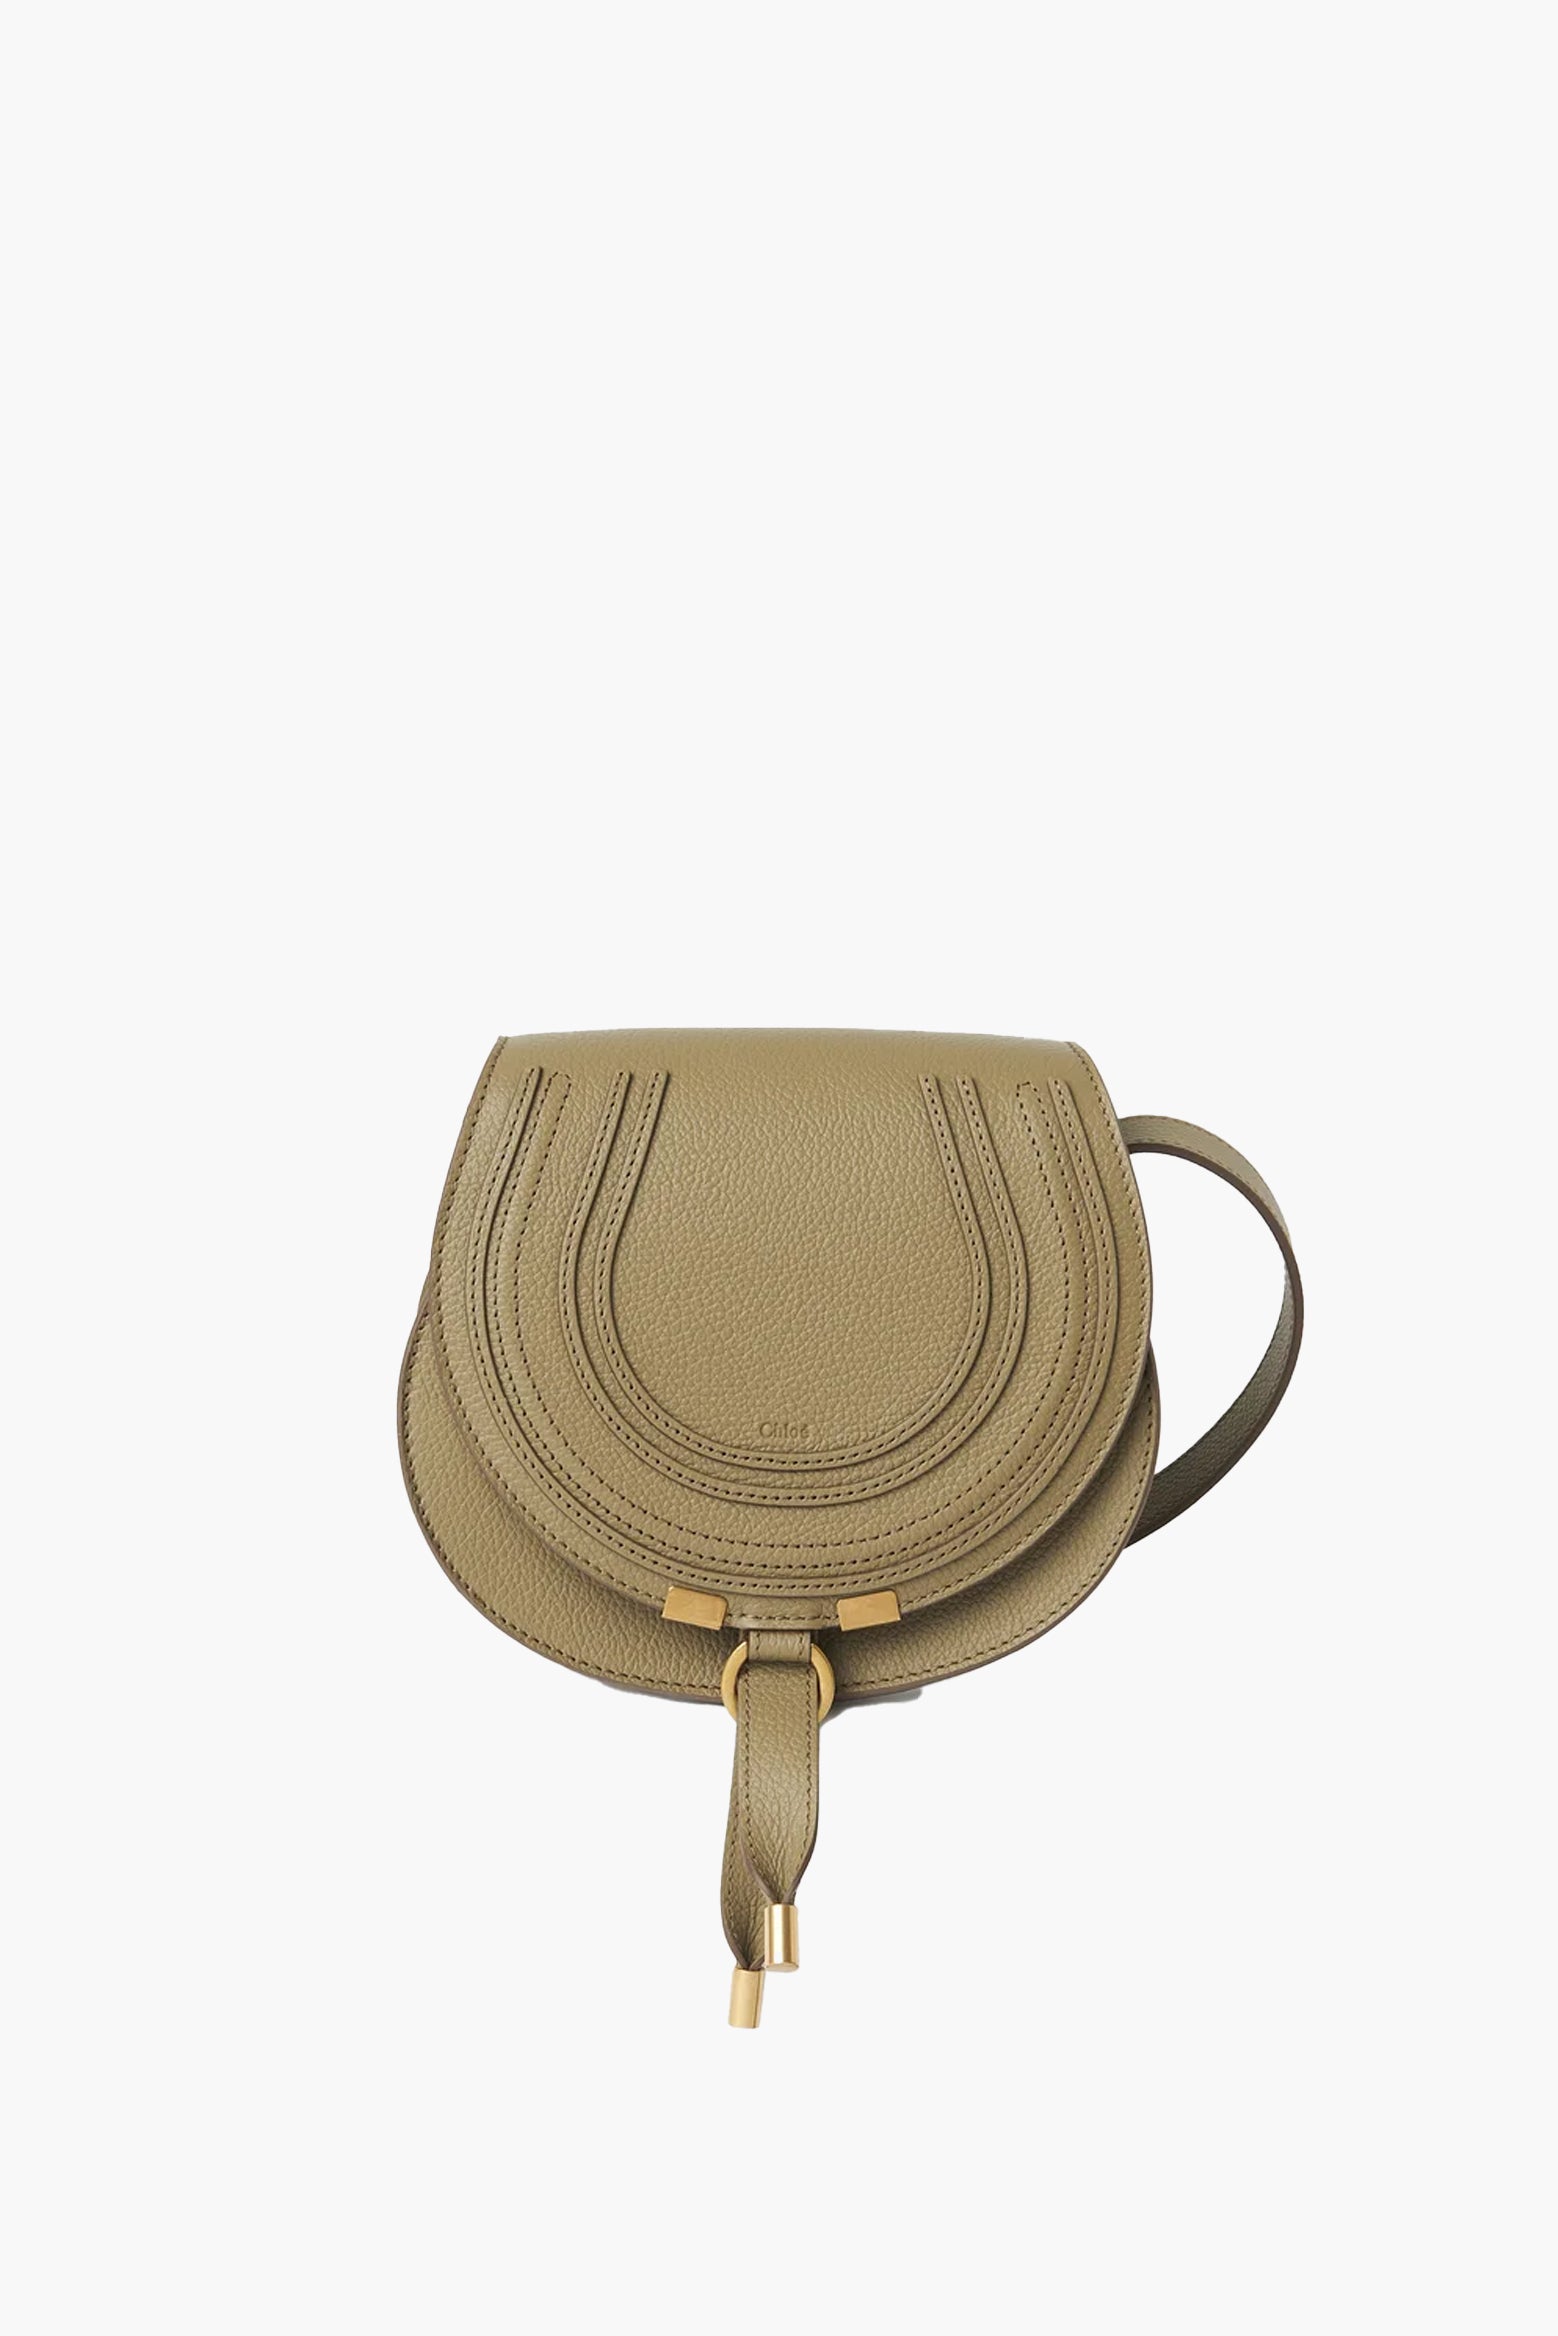 Chloé Marcie Small Saddle Bag in Pottery Green available at The New Trend Australia.